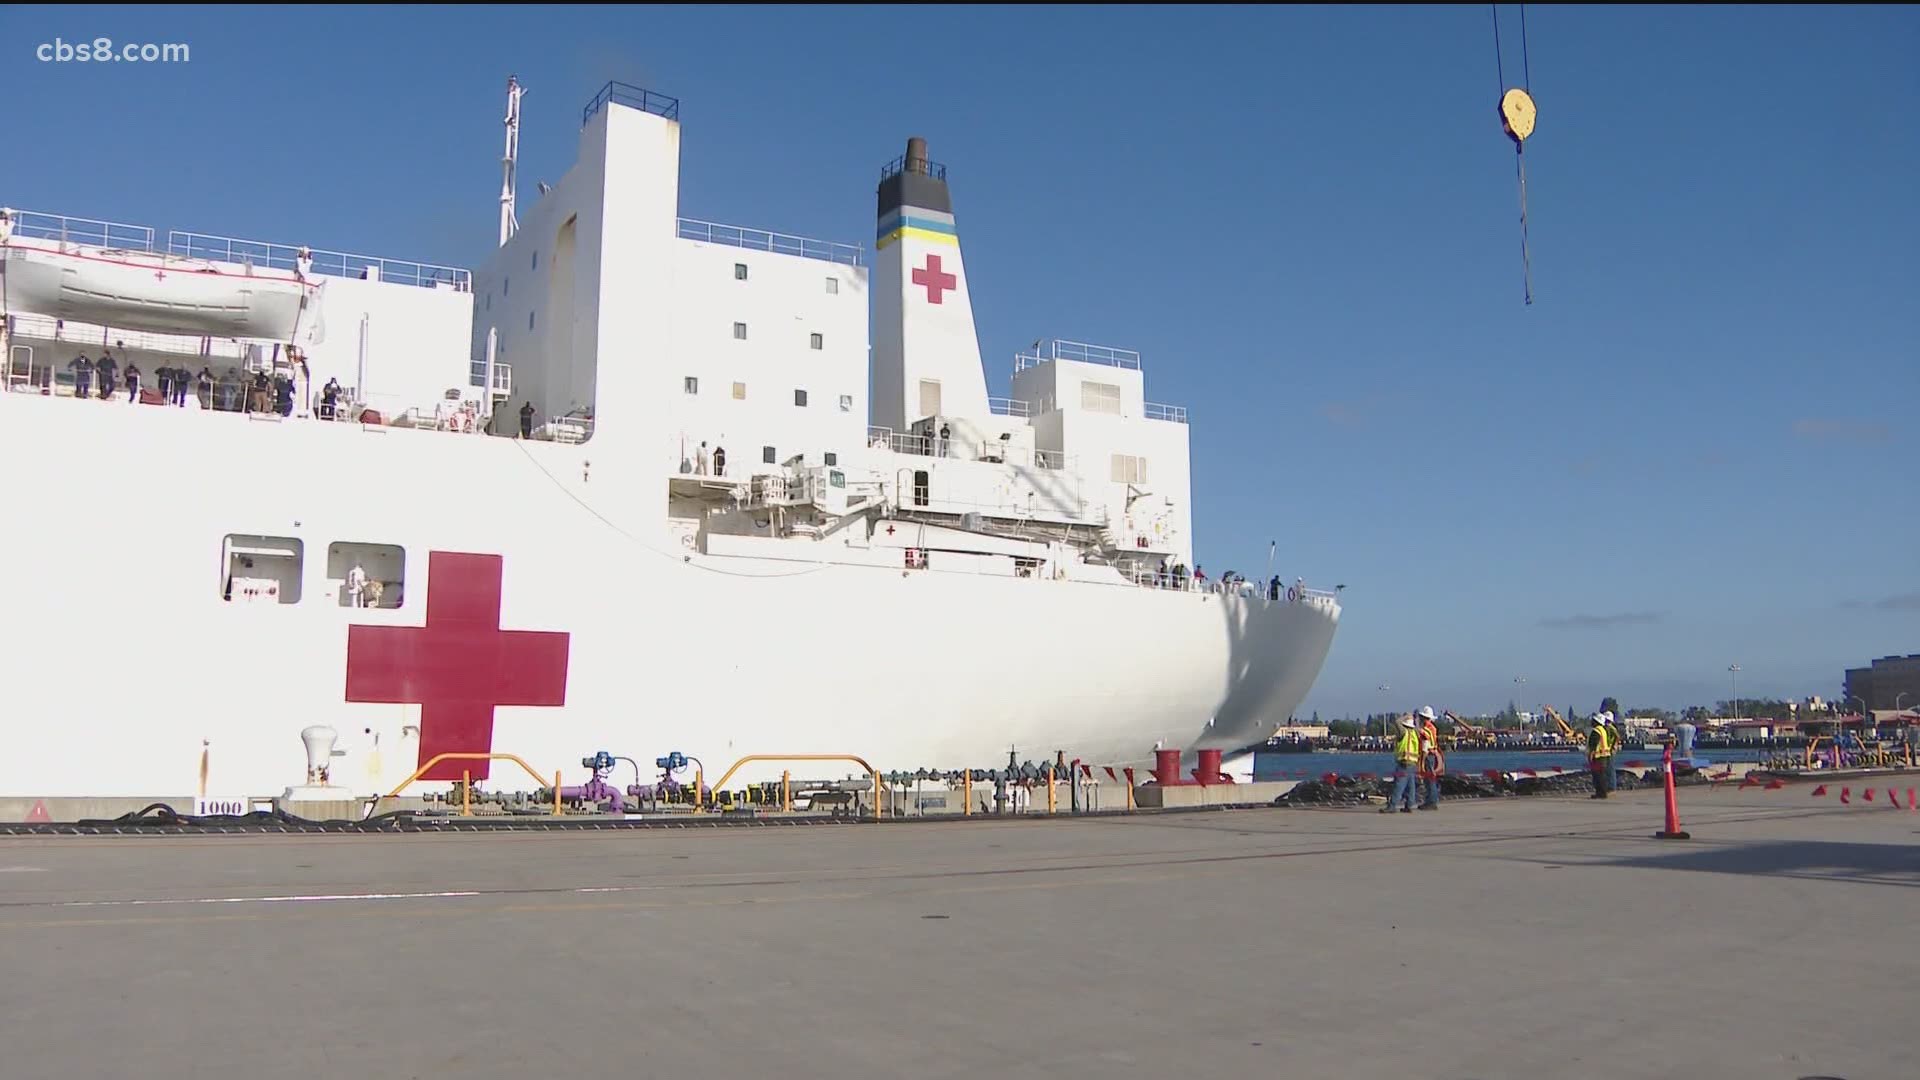 The Navy hospital ship was in Los Angeles to help the region during the coronavirus crisis.